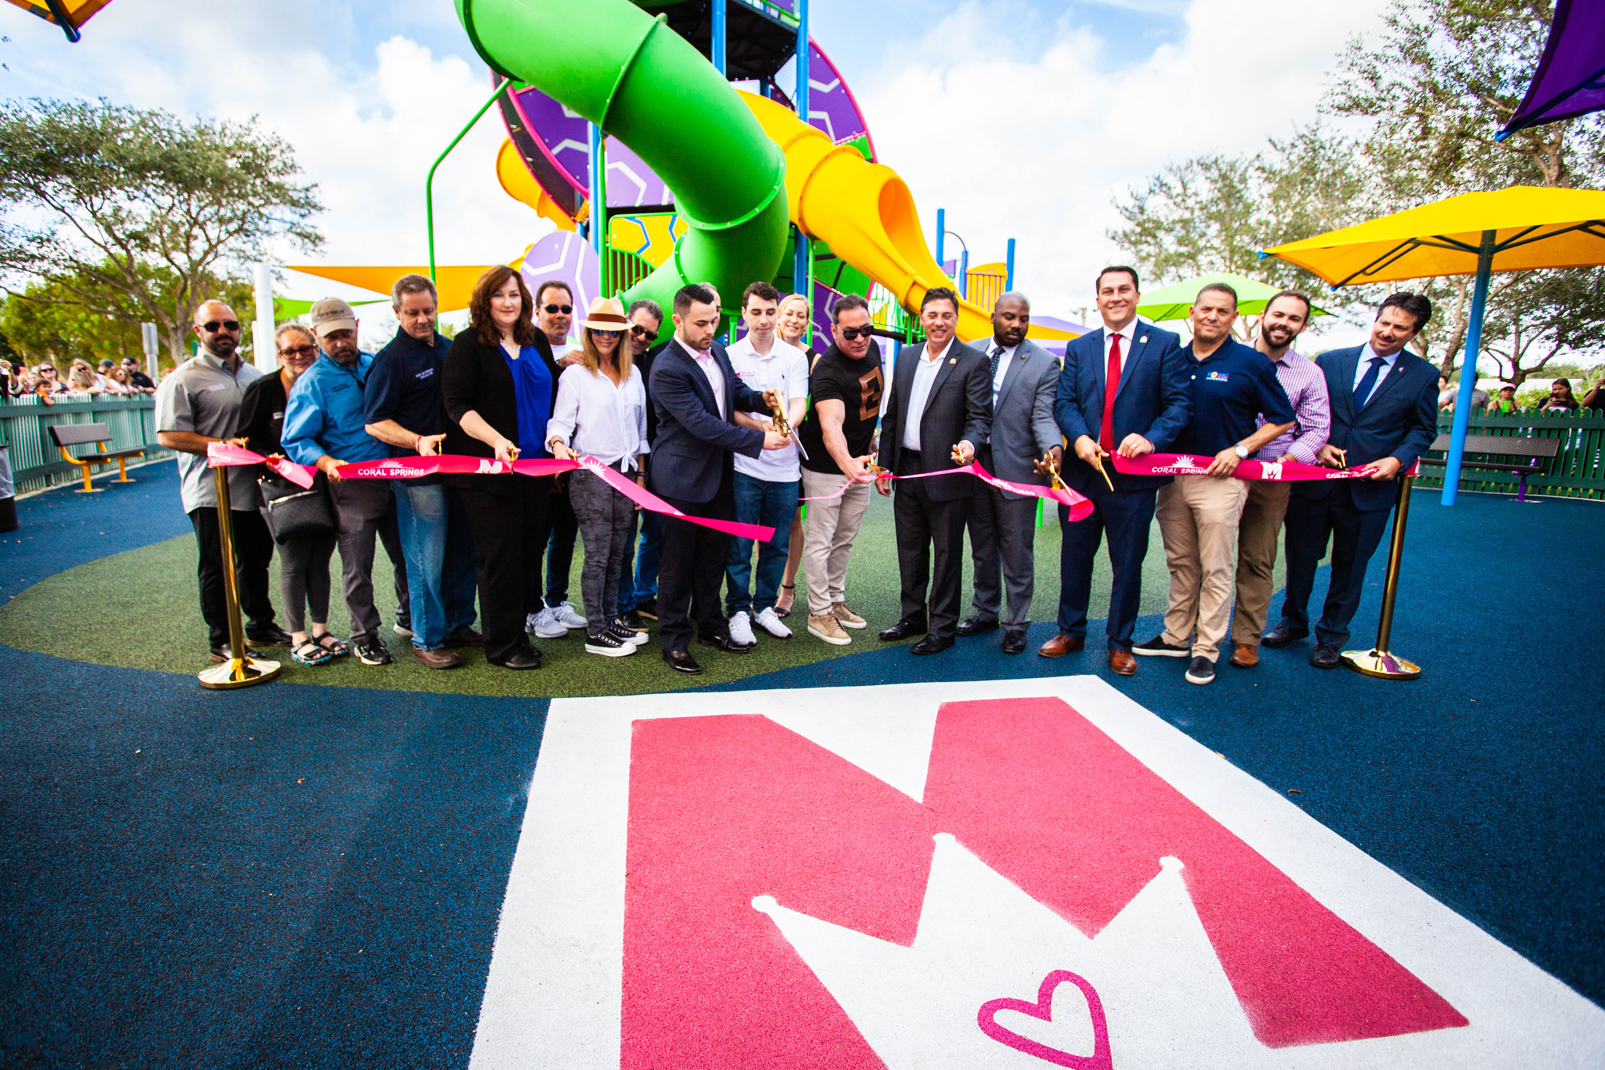 VIDEO: Playground Dedicated to Parkland Victim Meadow Pollack Holds Ribbon-Cutting